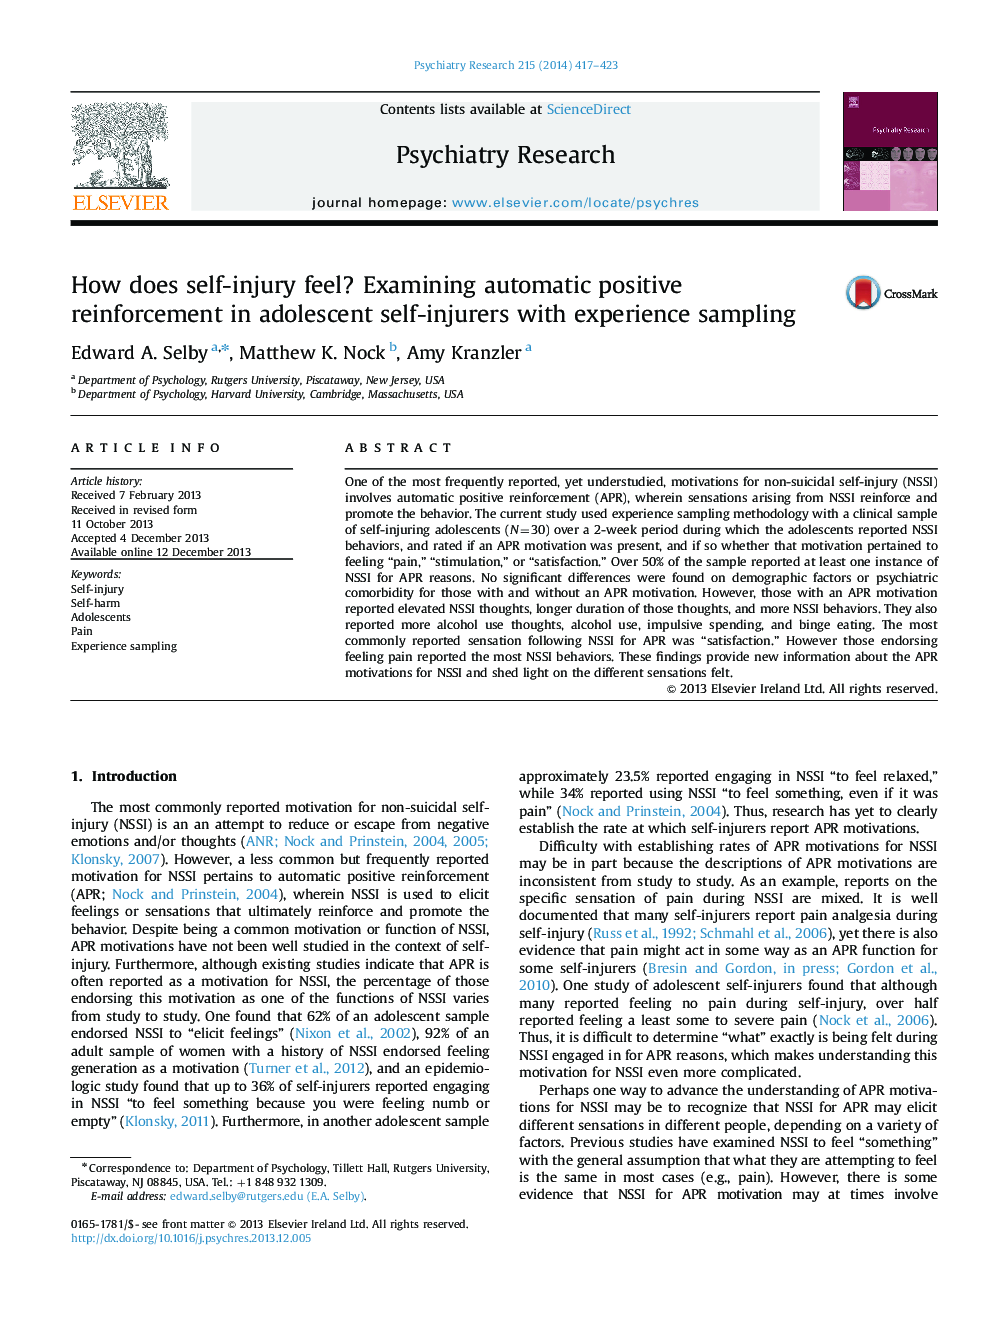 How does self-injury feel? Examining automatic positive reinforcement in adolescent self-injurers with experience sampling